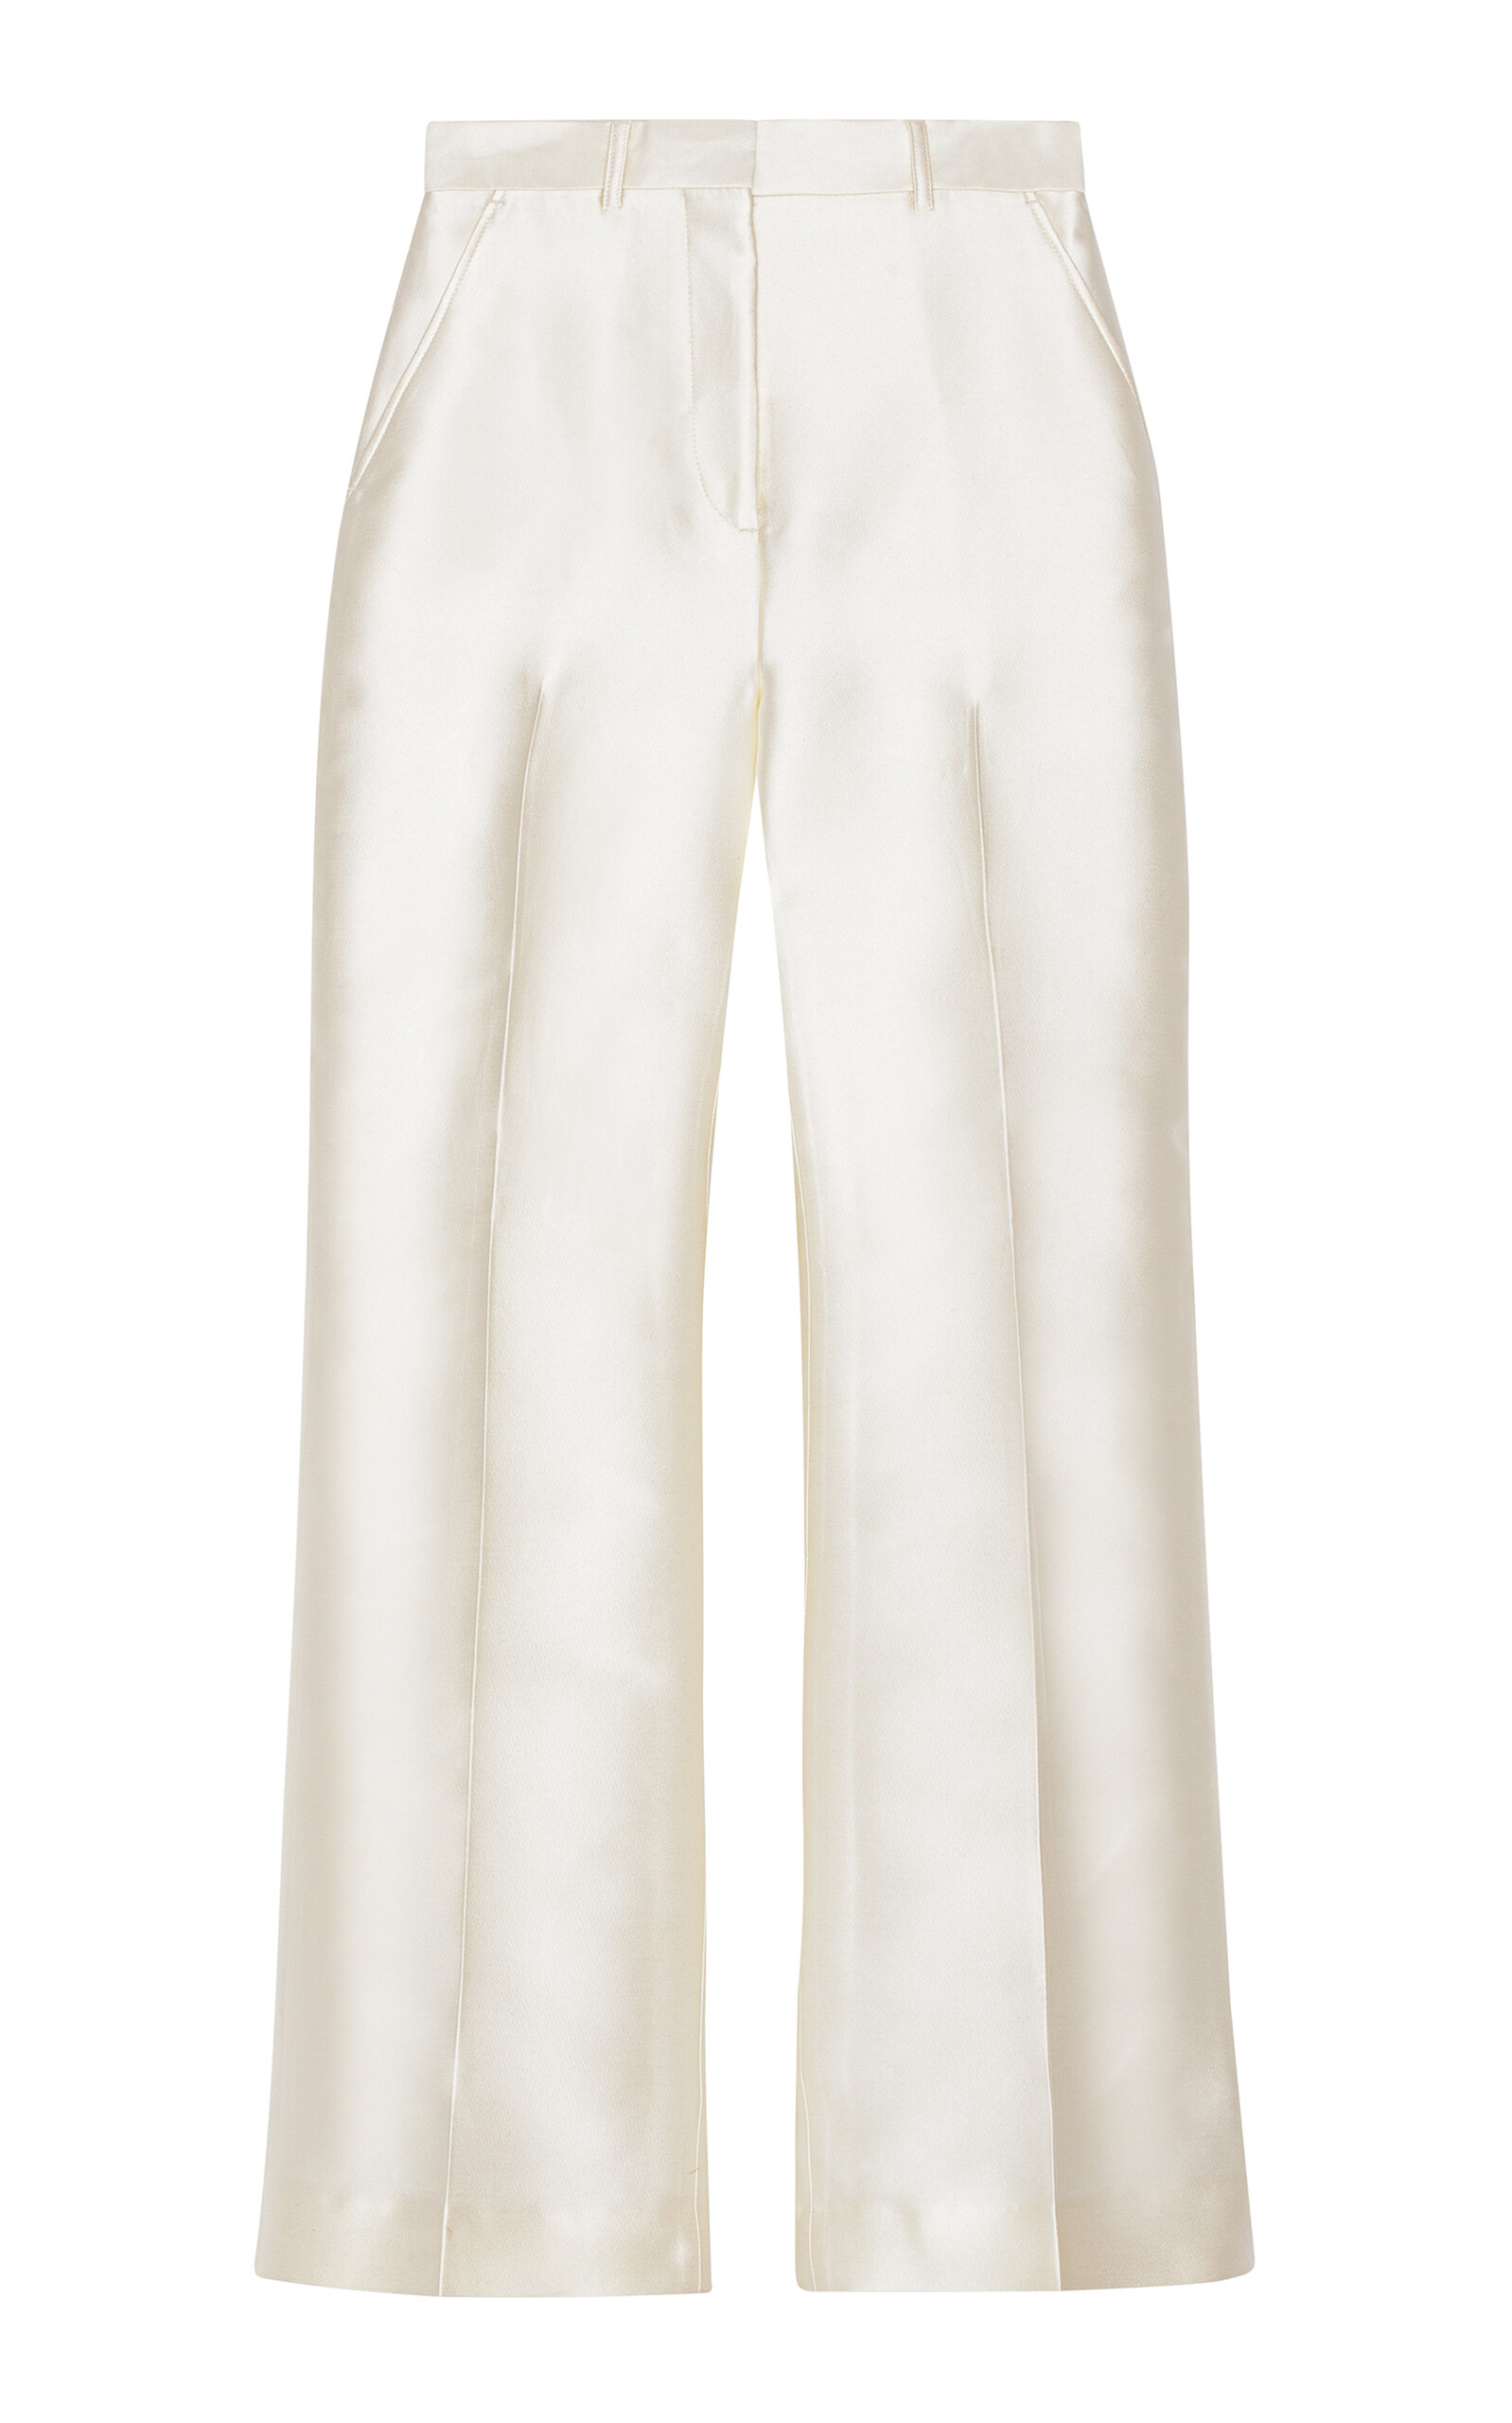 Mark Kenly Domino Tan Perrie Slit-detailed Trousers In Ivory